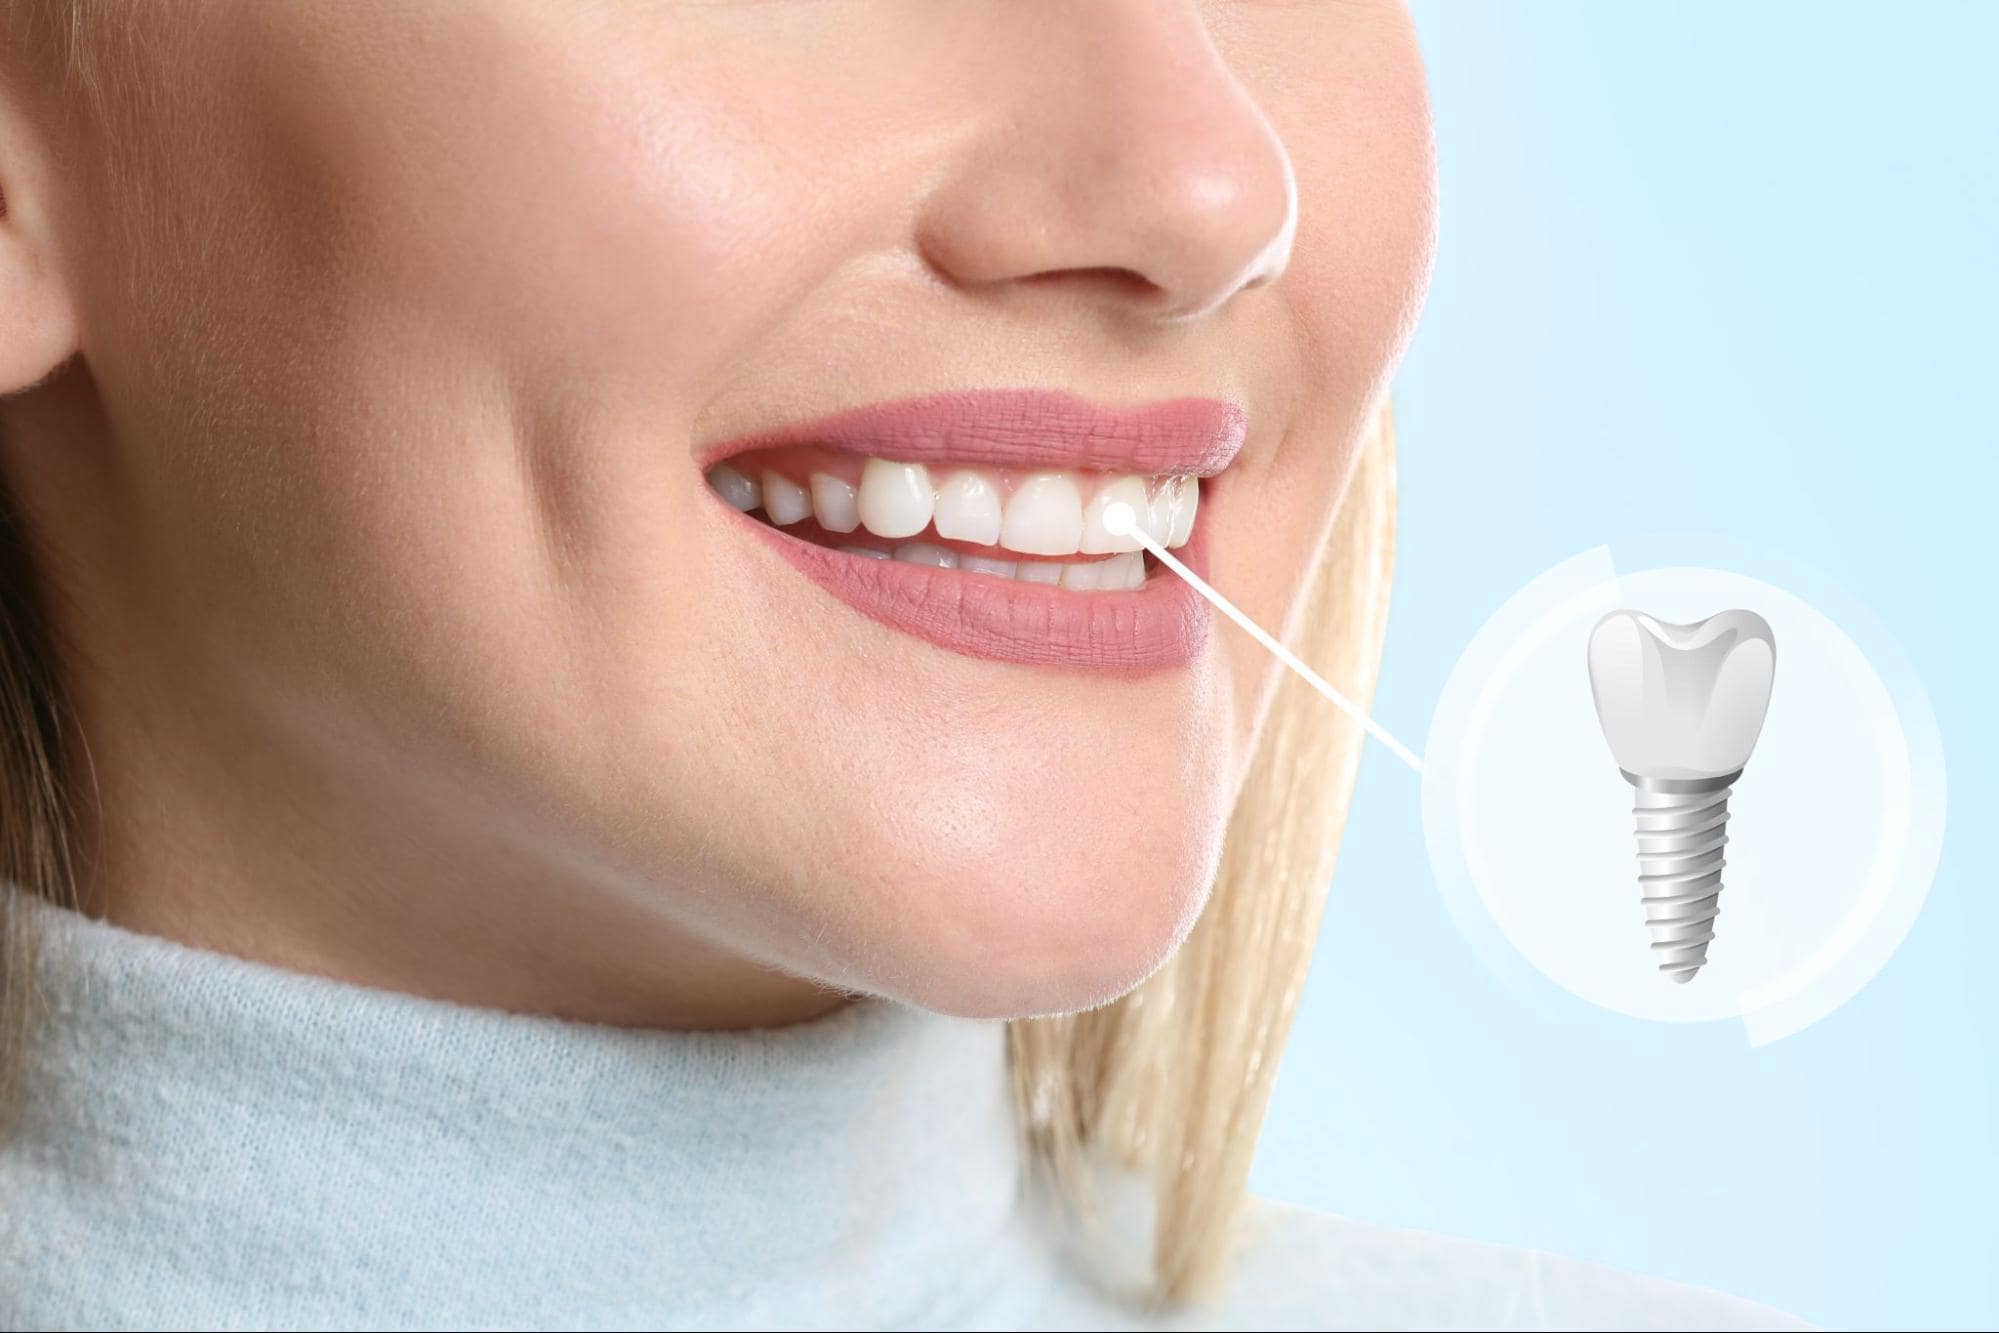 Dental Implants: The Long-term Solution for Your Smile